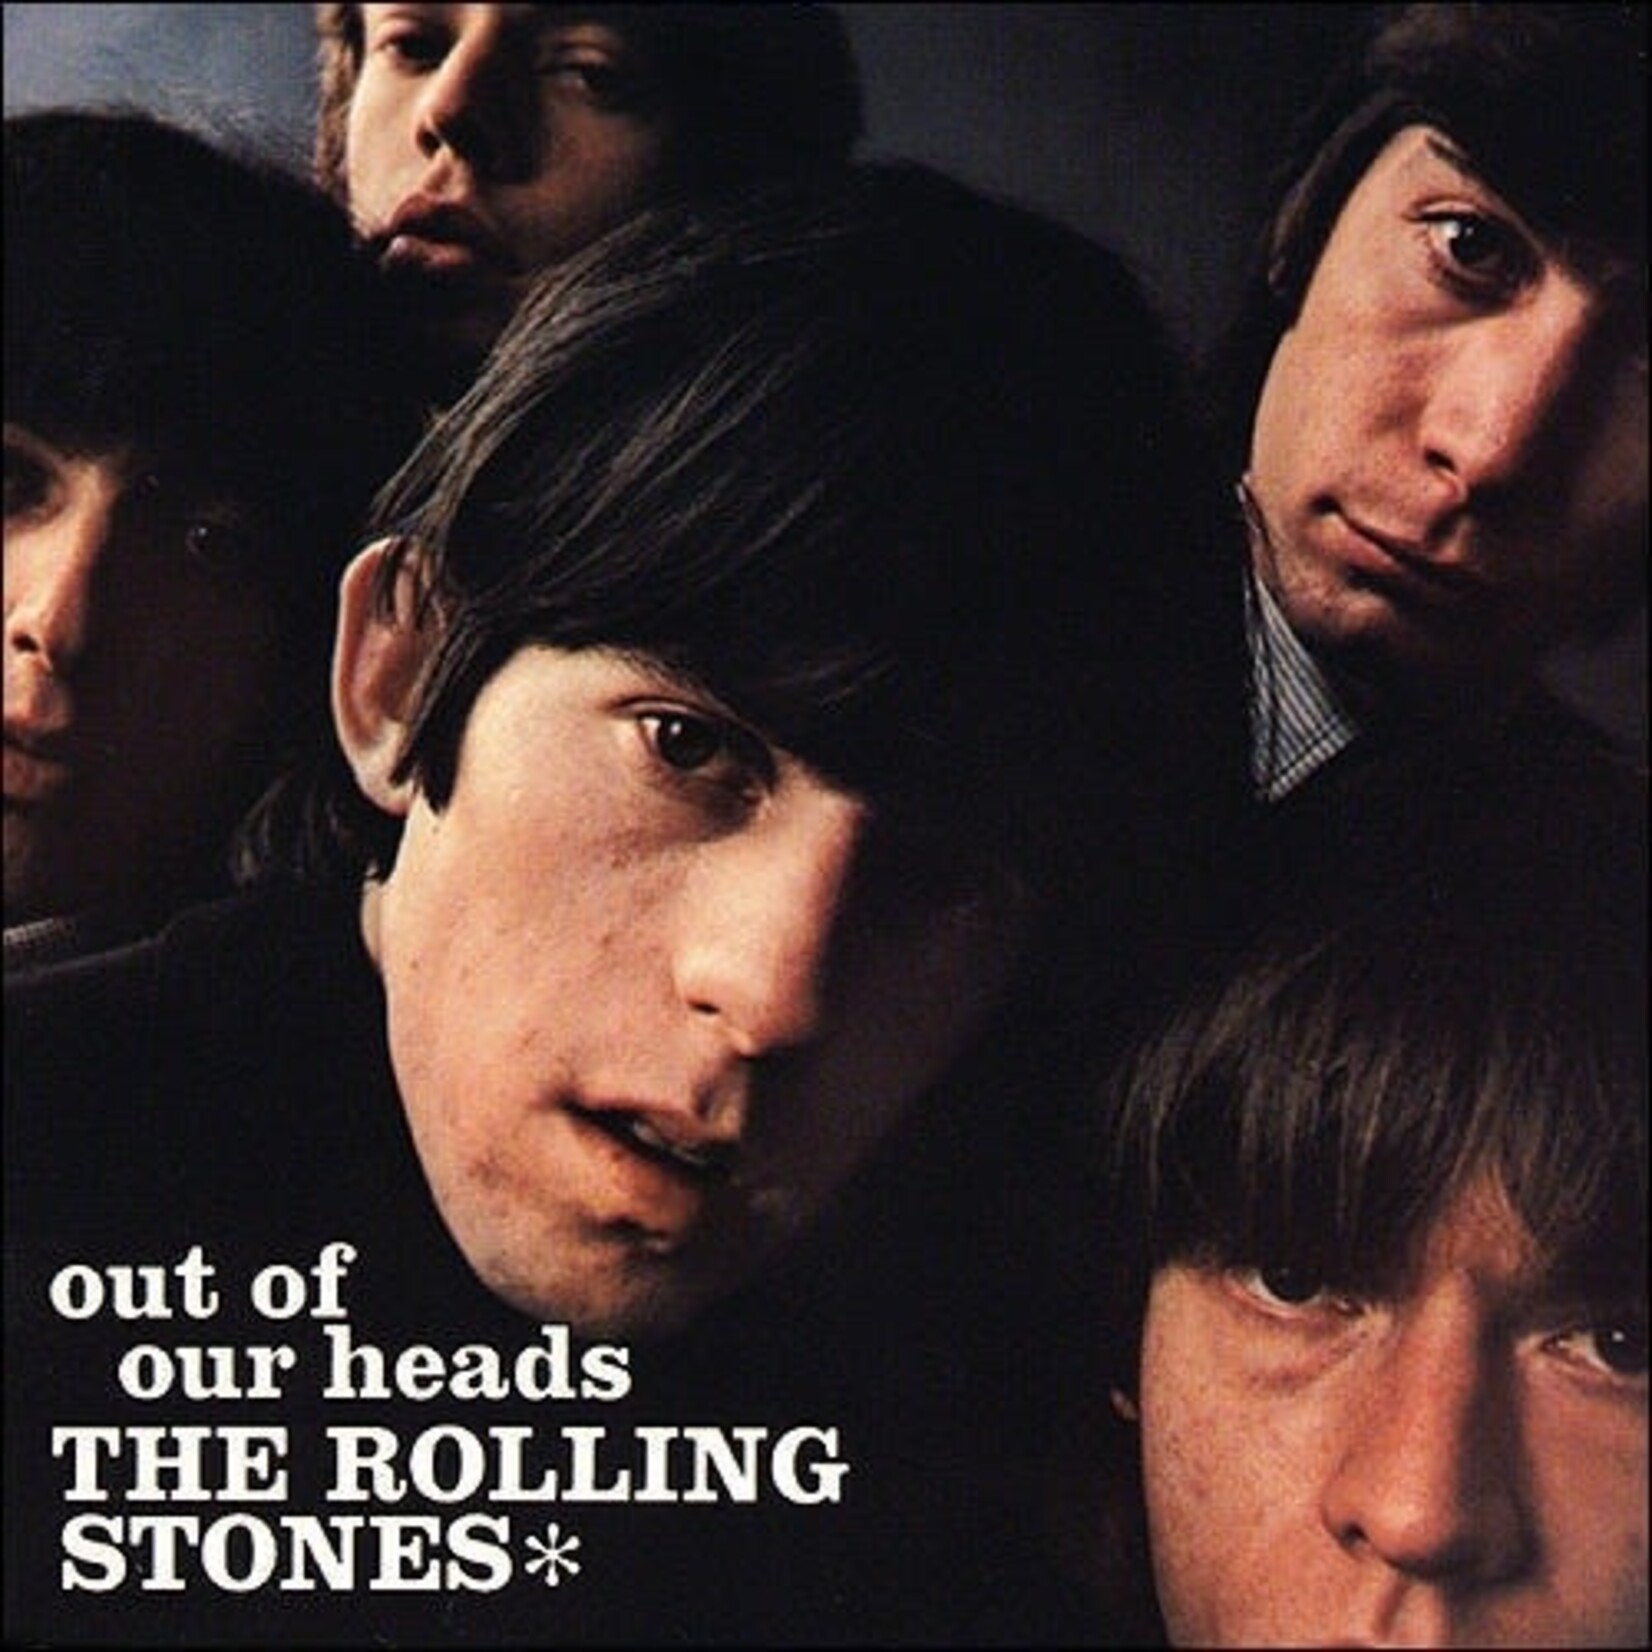 Vinyl The Rolling Stones - Out Of Our Heads  US Edition